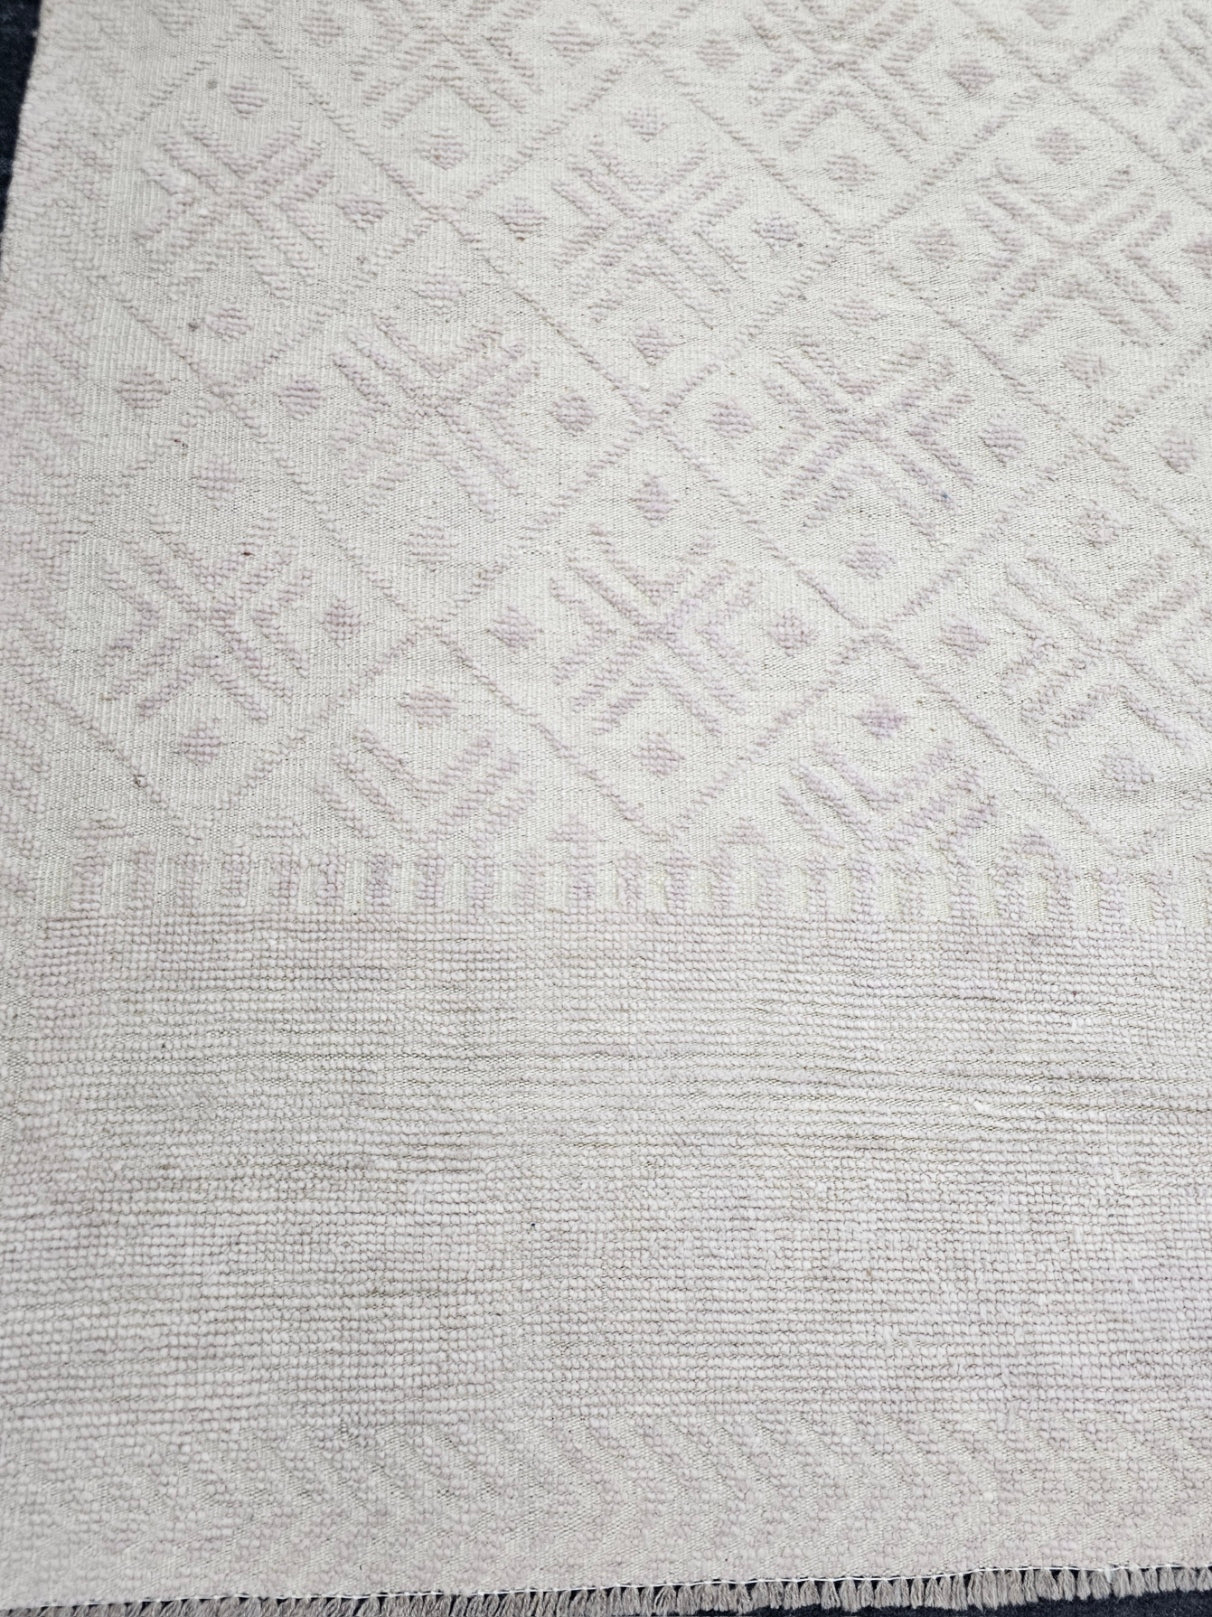 10249 New Light Pink distressed Moroccan Rug